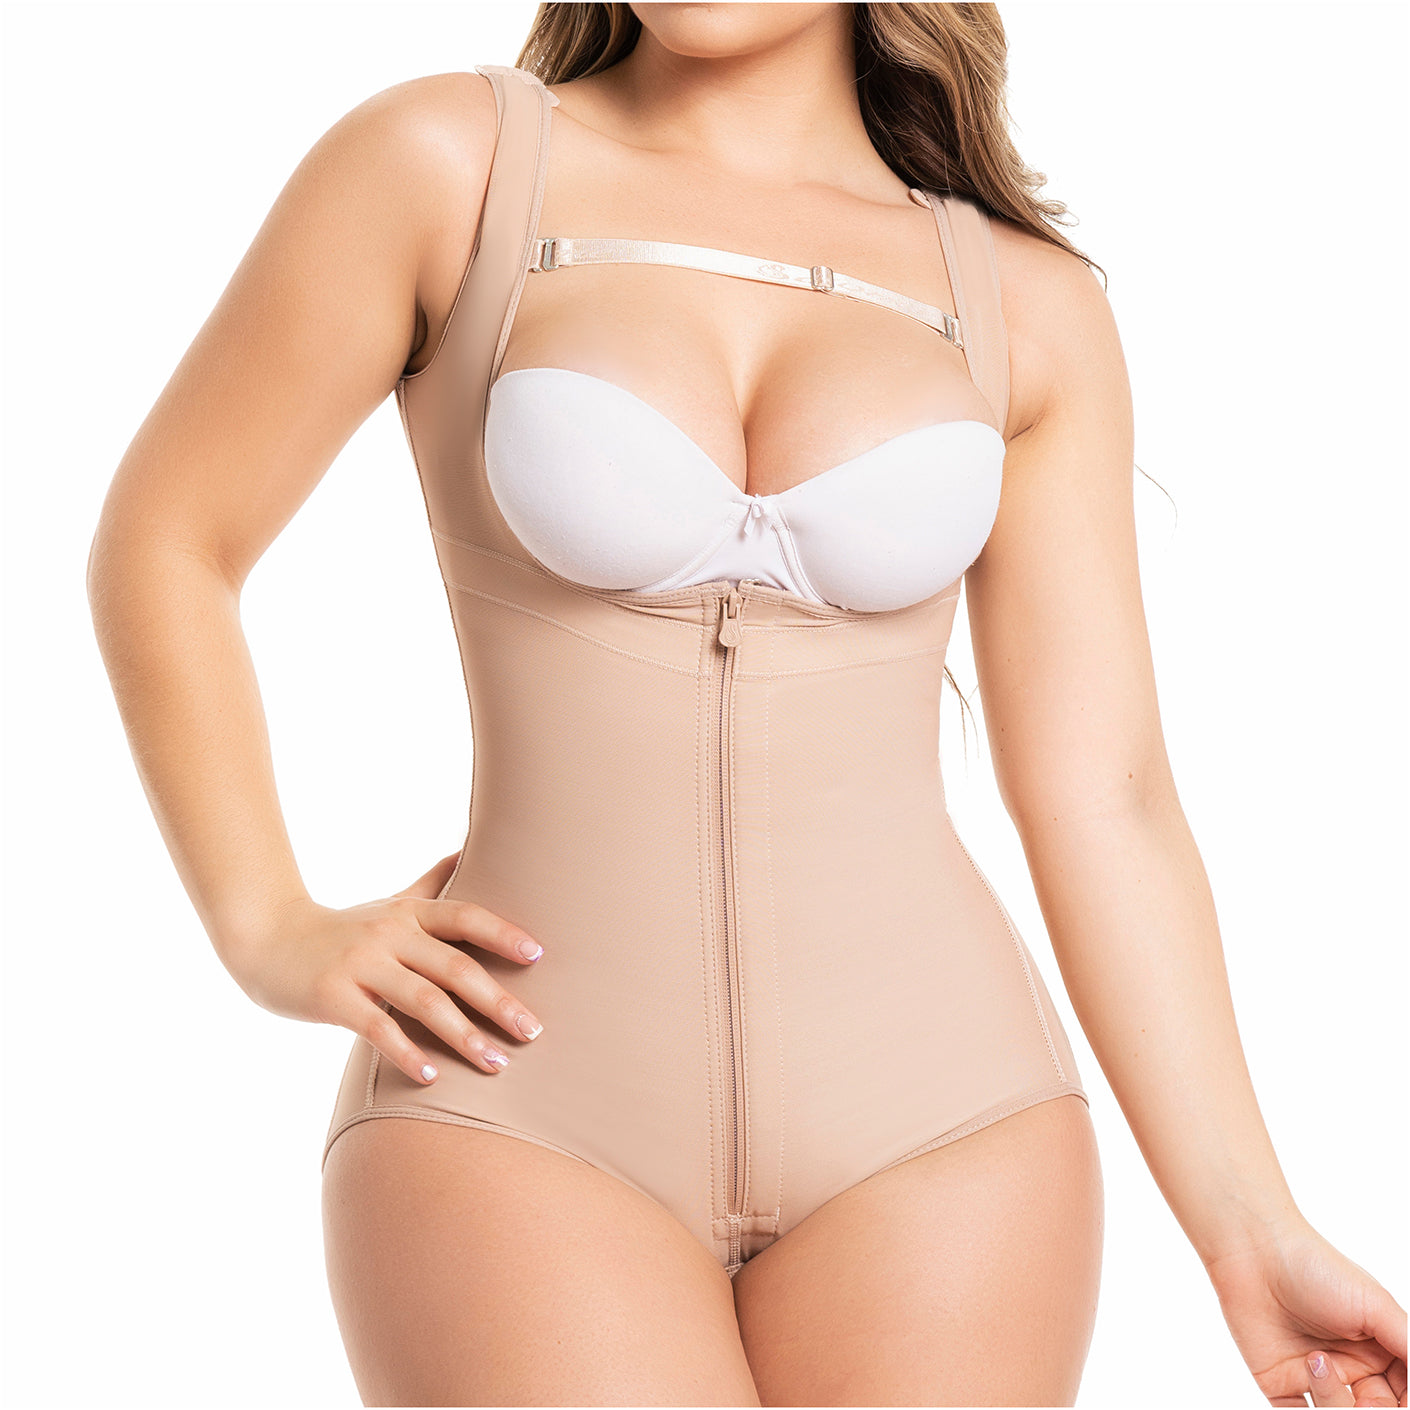 Fajas Salome 0218 Girdle High-Waist Shorts Daily Use Body Shaper with –  Melao Boutique